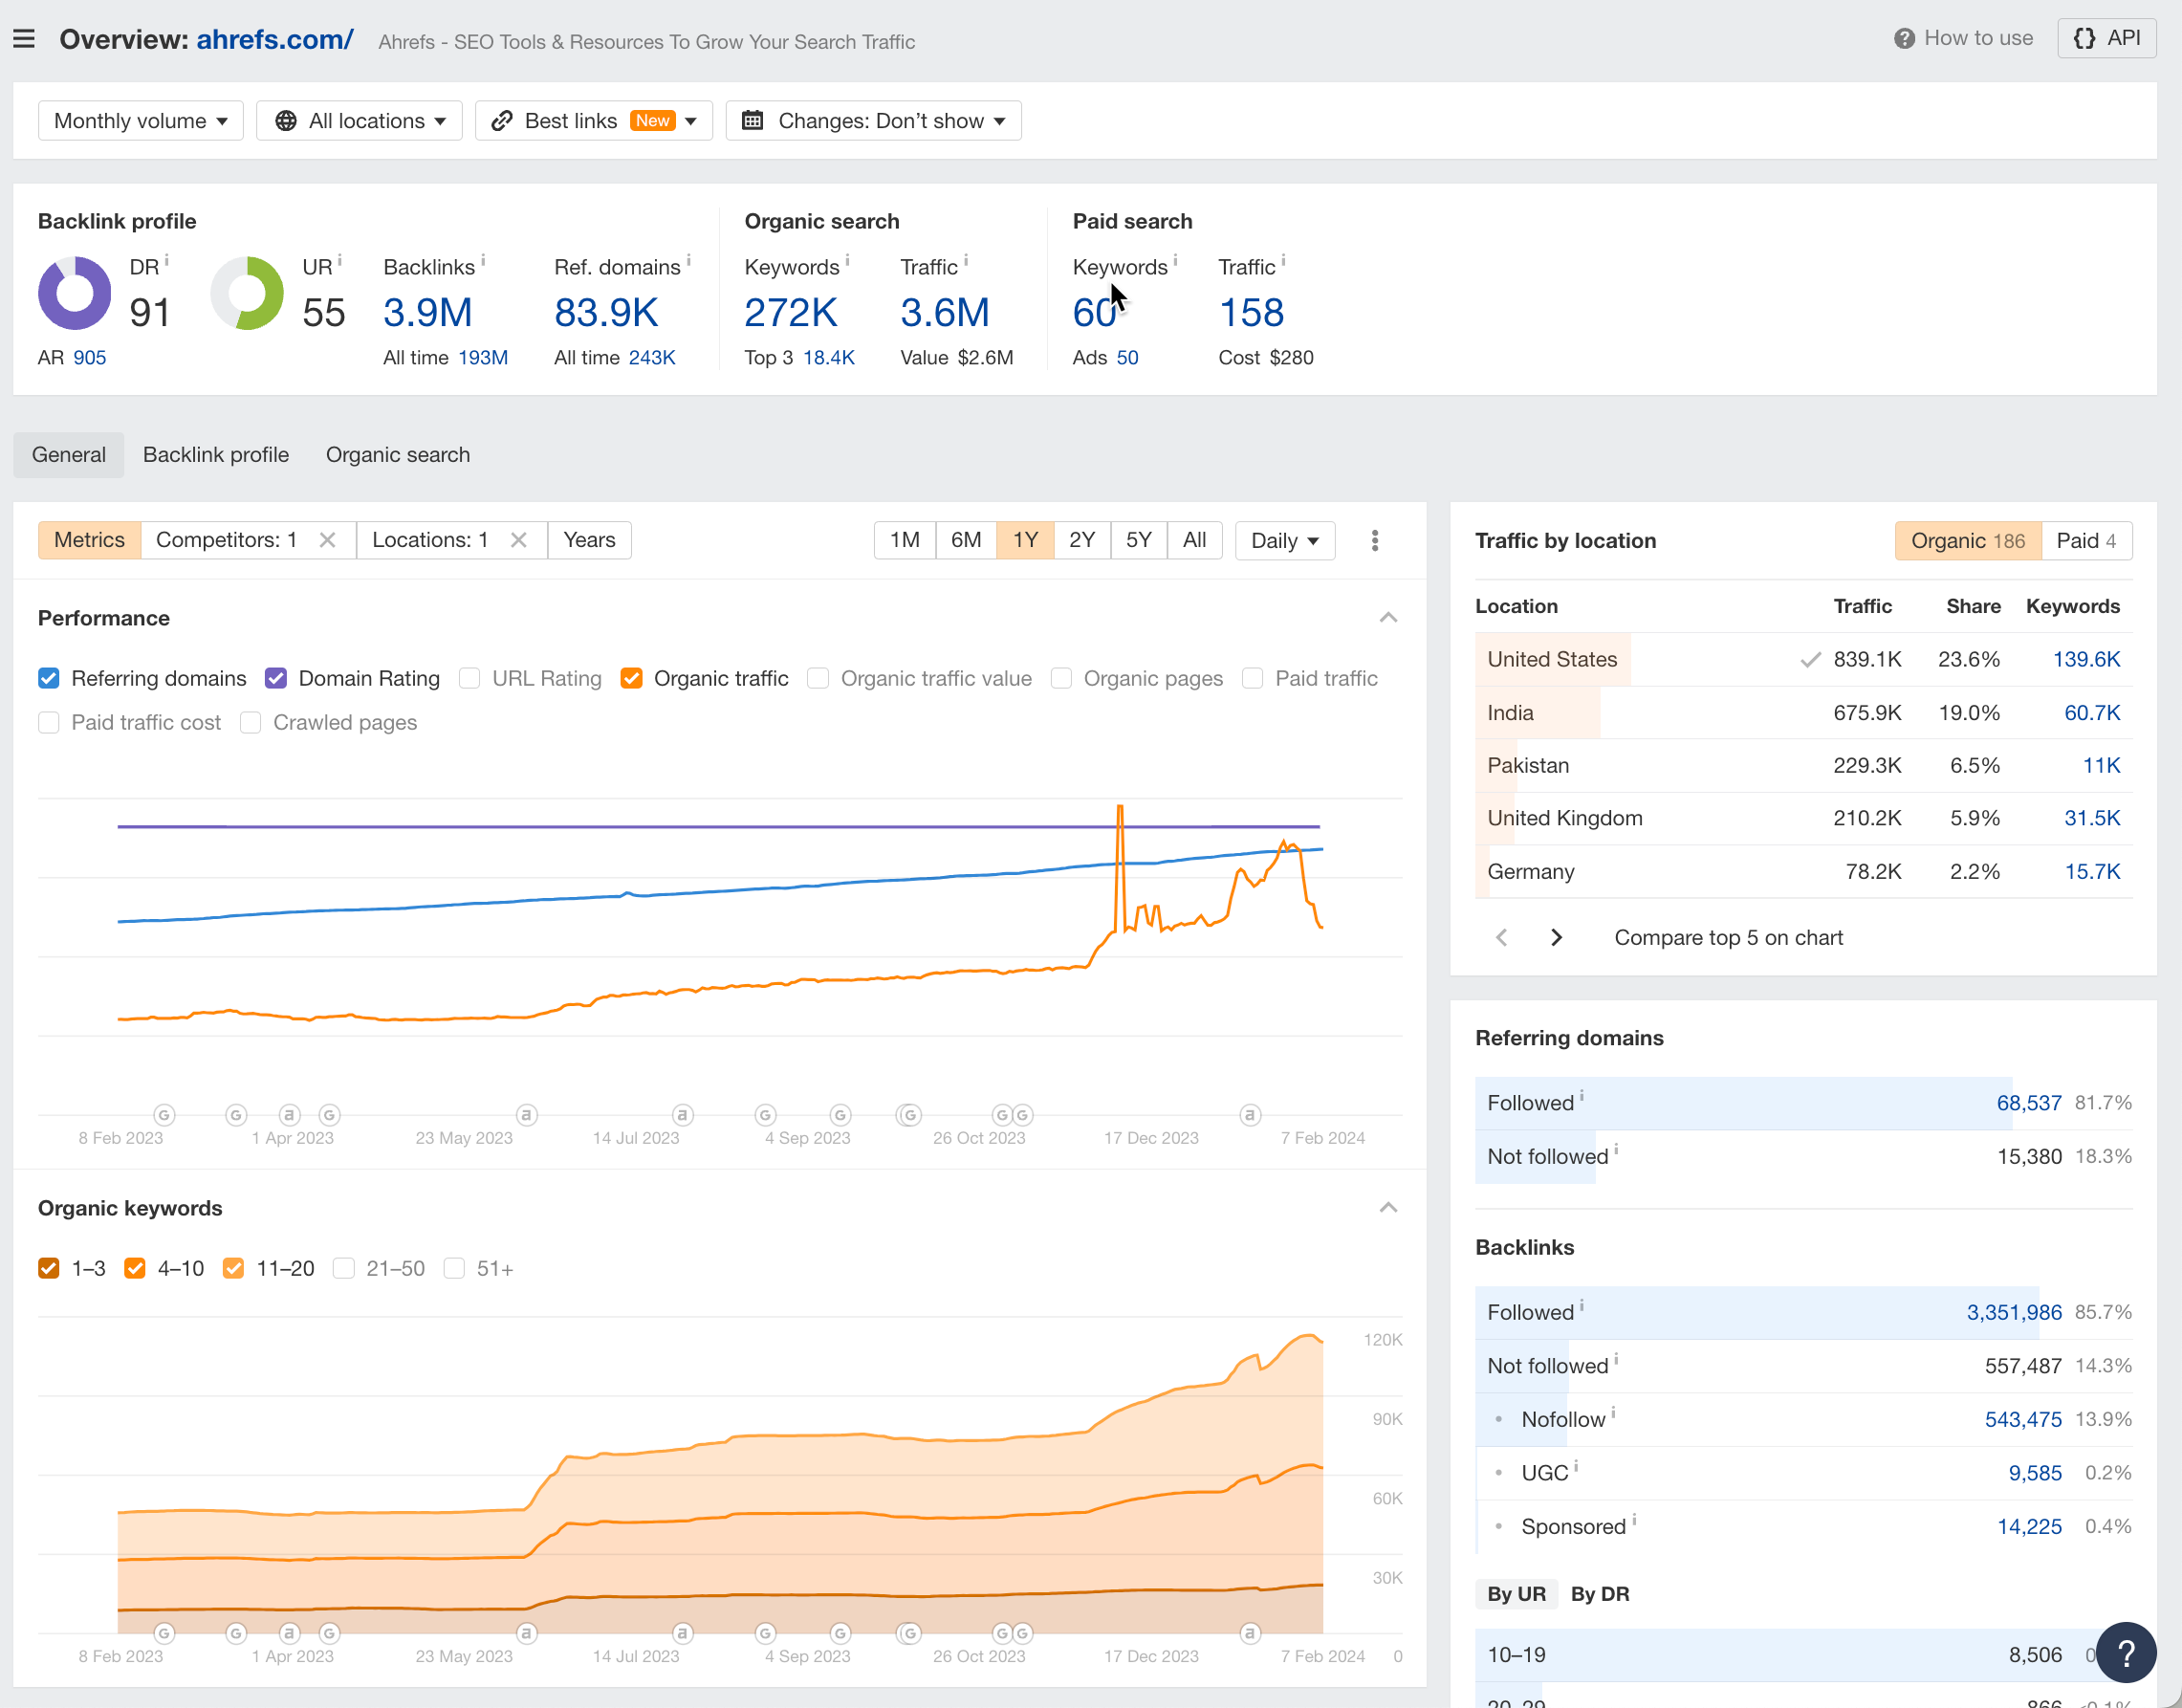 View the organic traffic performance of any website in Ahrefs’ Site Explorer